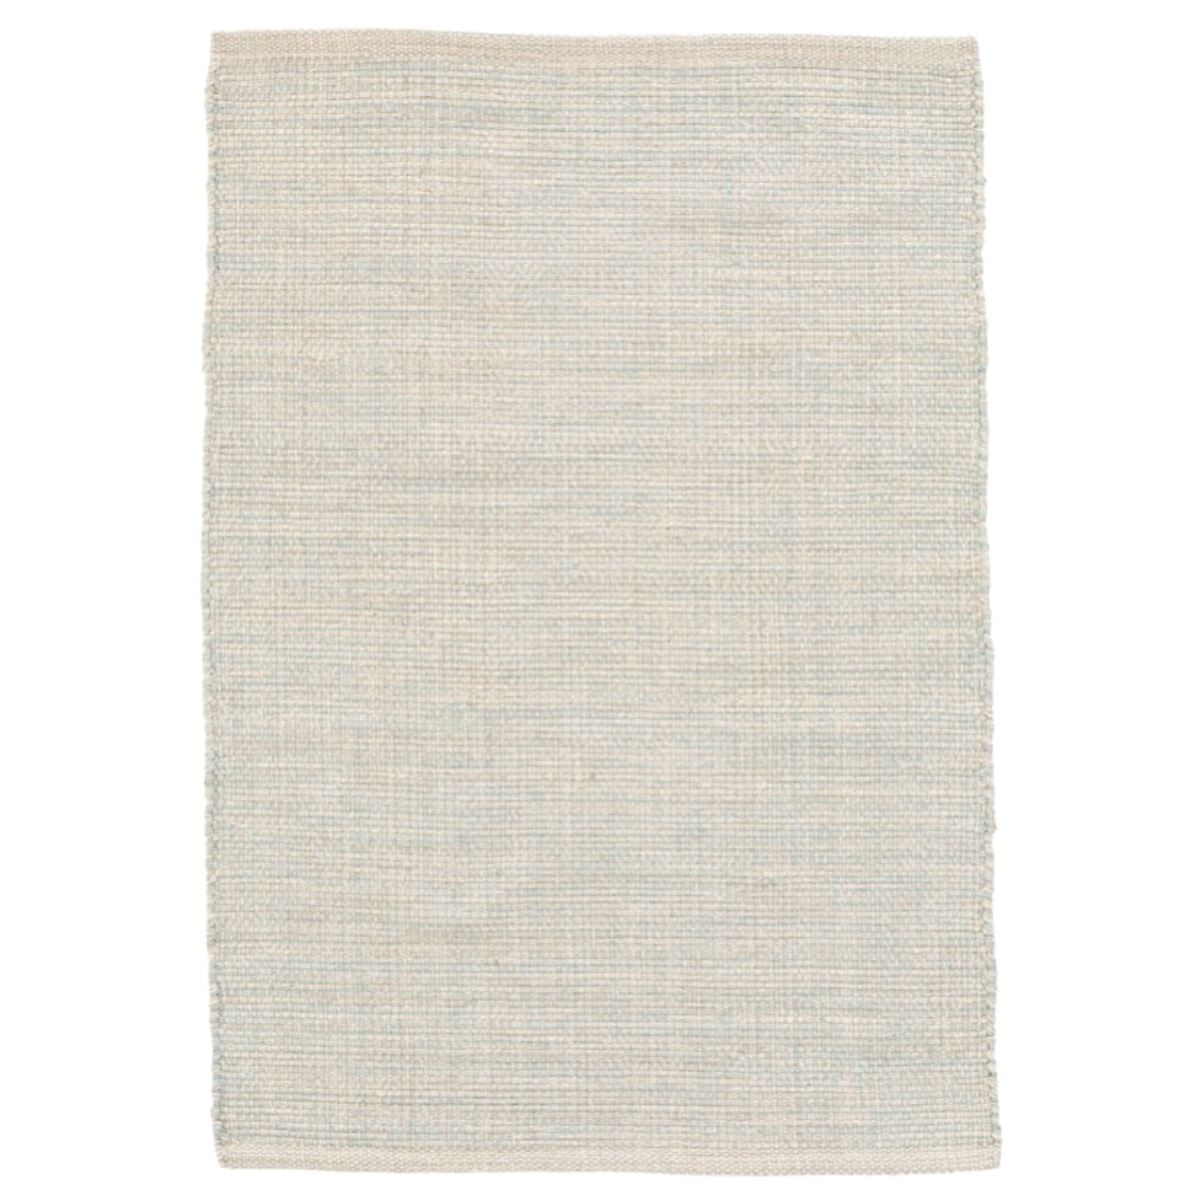 Marled Light Blue Woven Cotton Rug. Top view. 